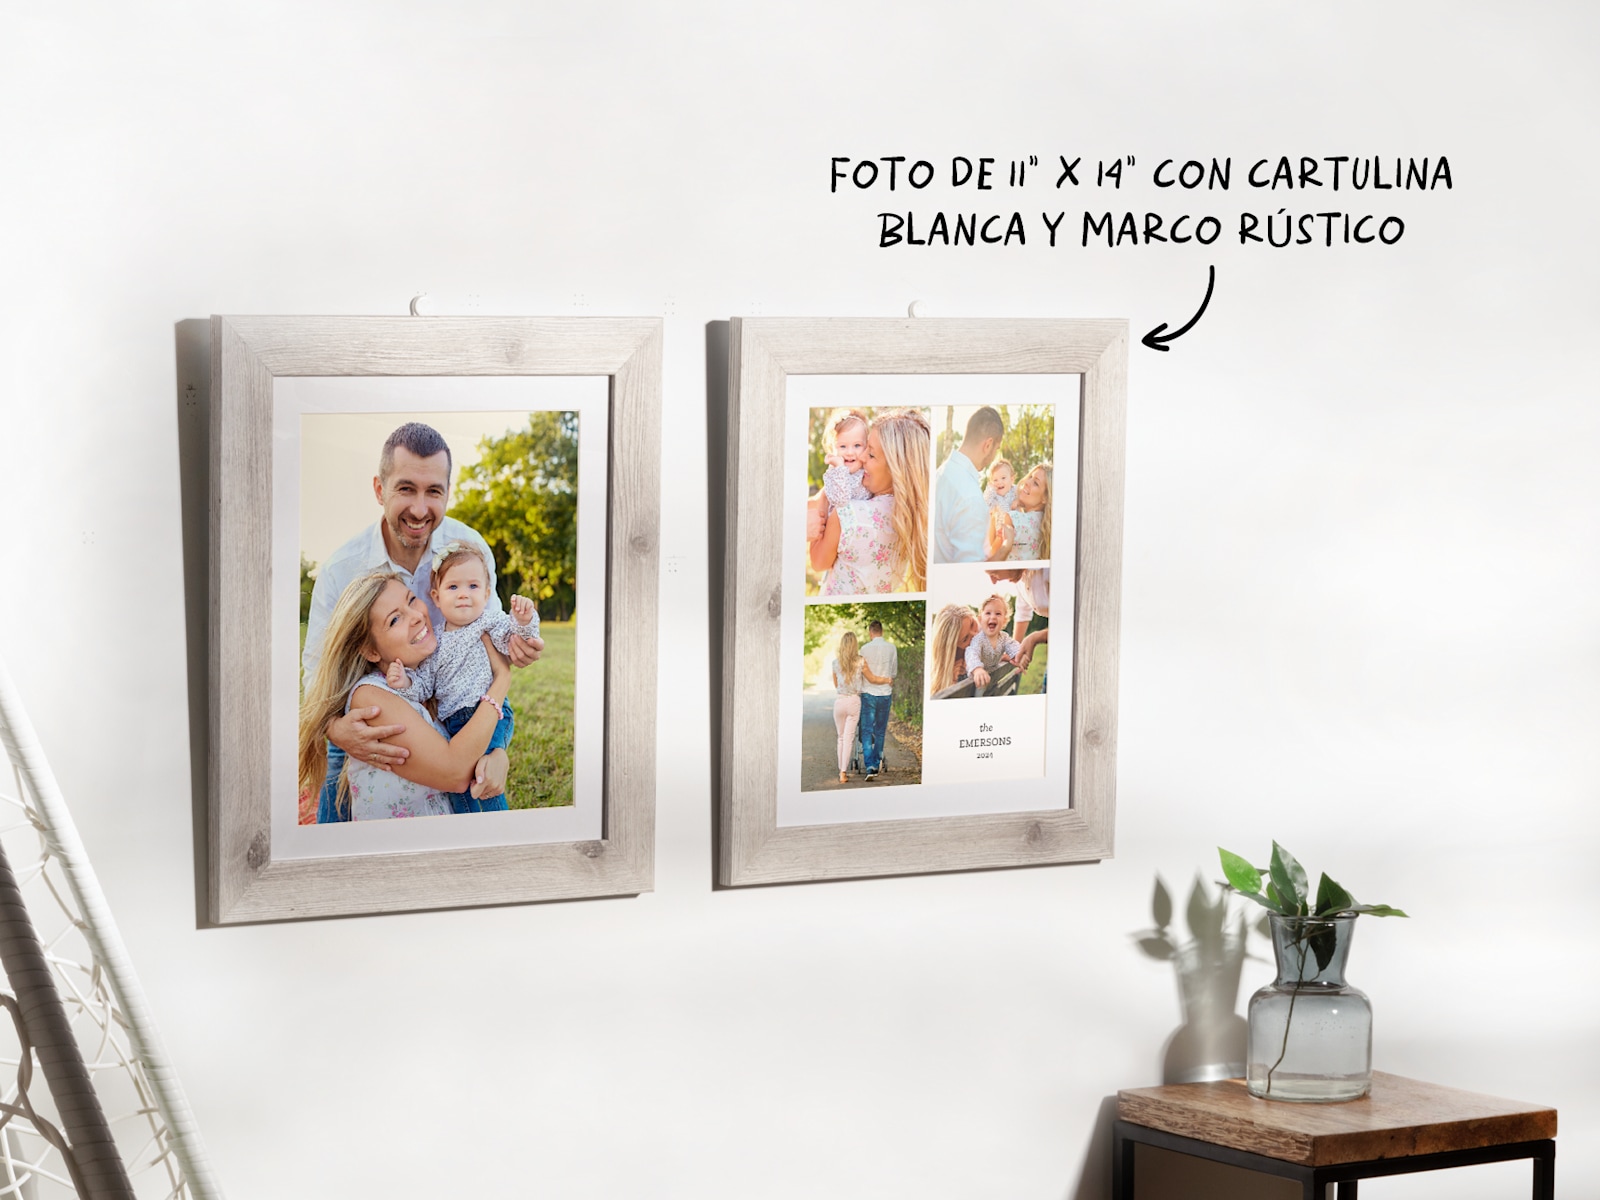 Two photo prints in rustic frames hang on a white wall.